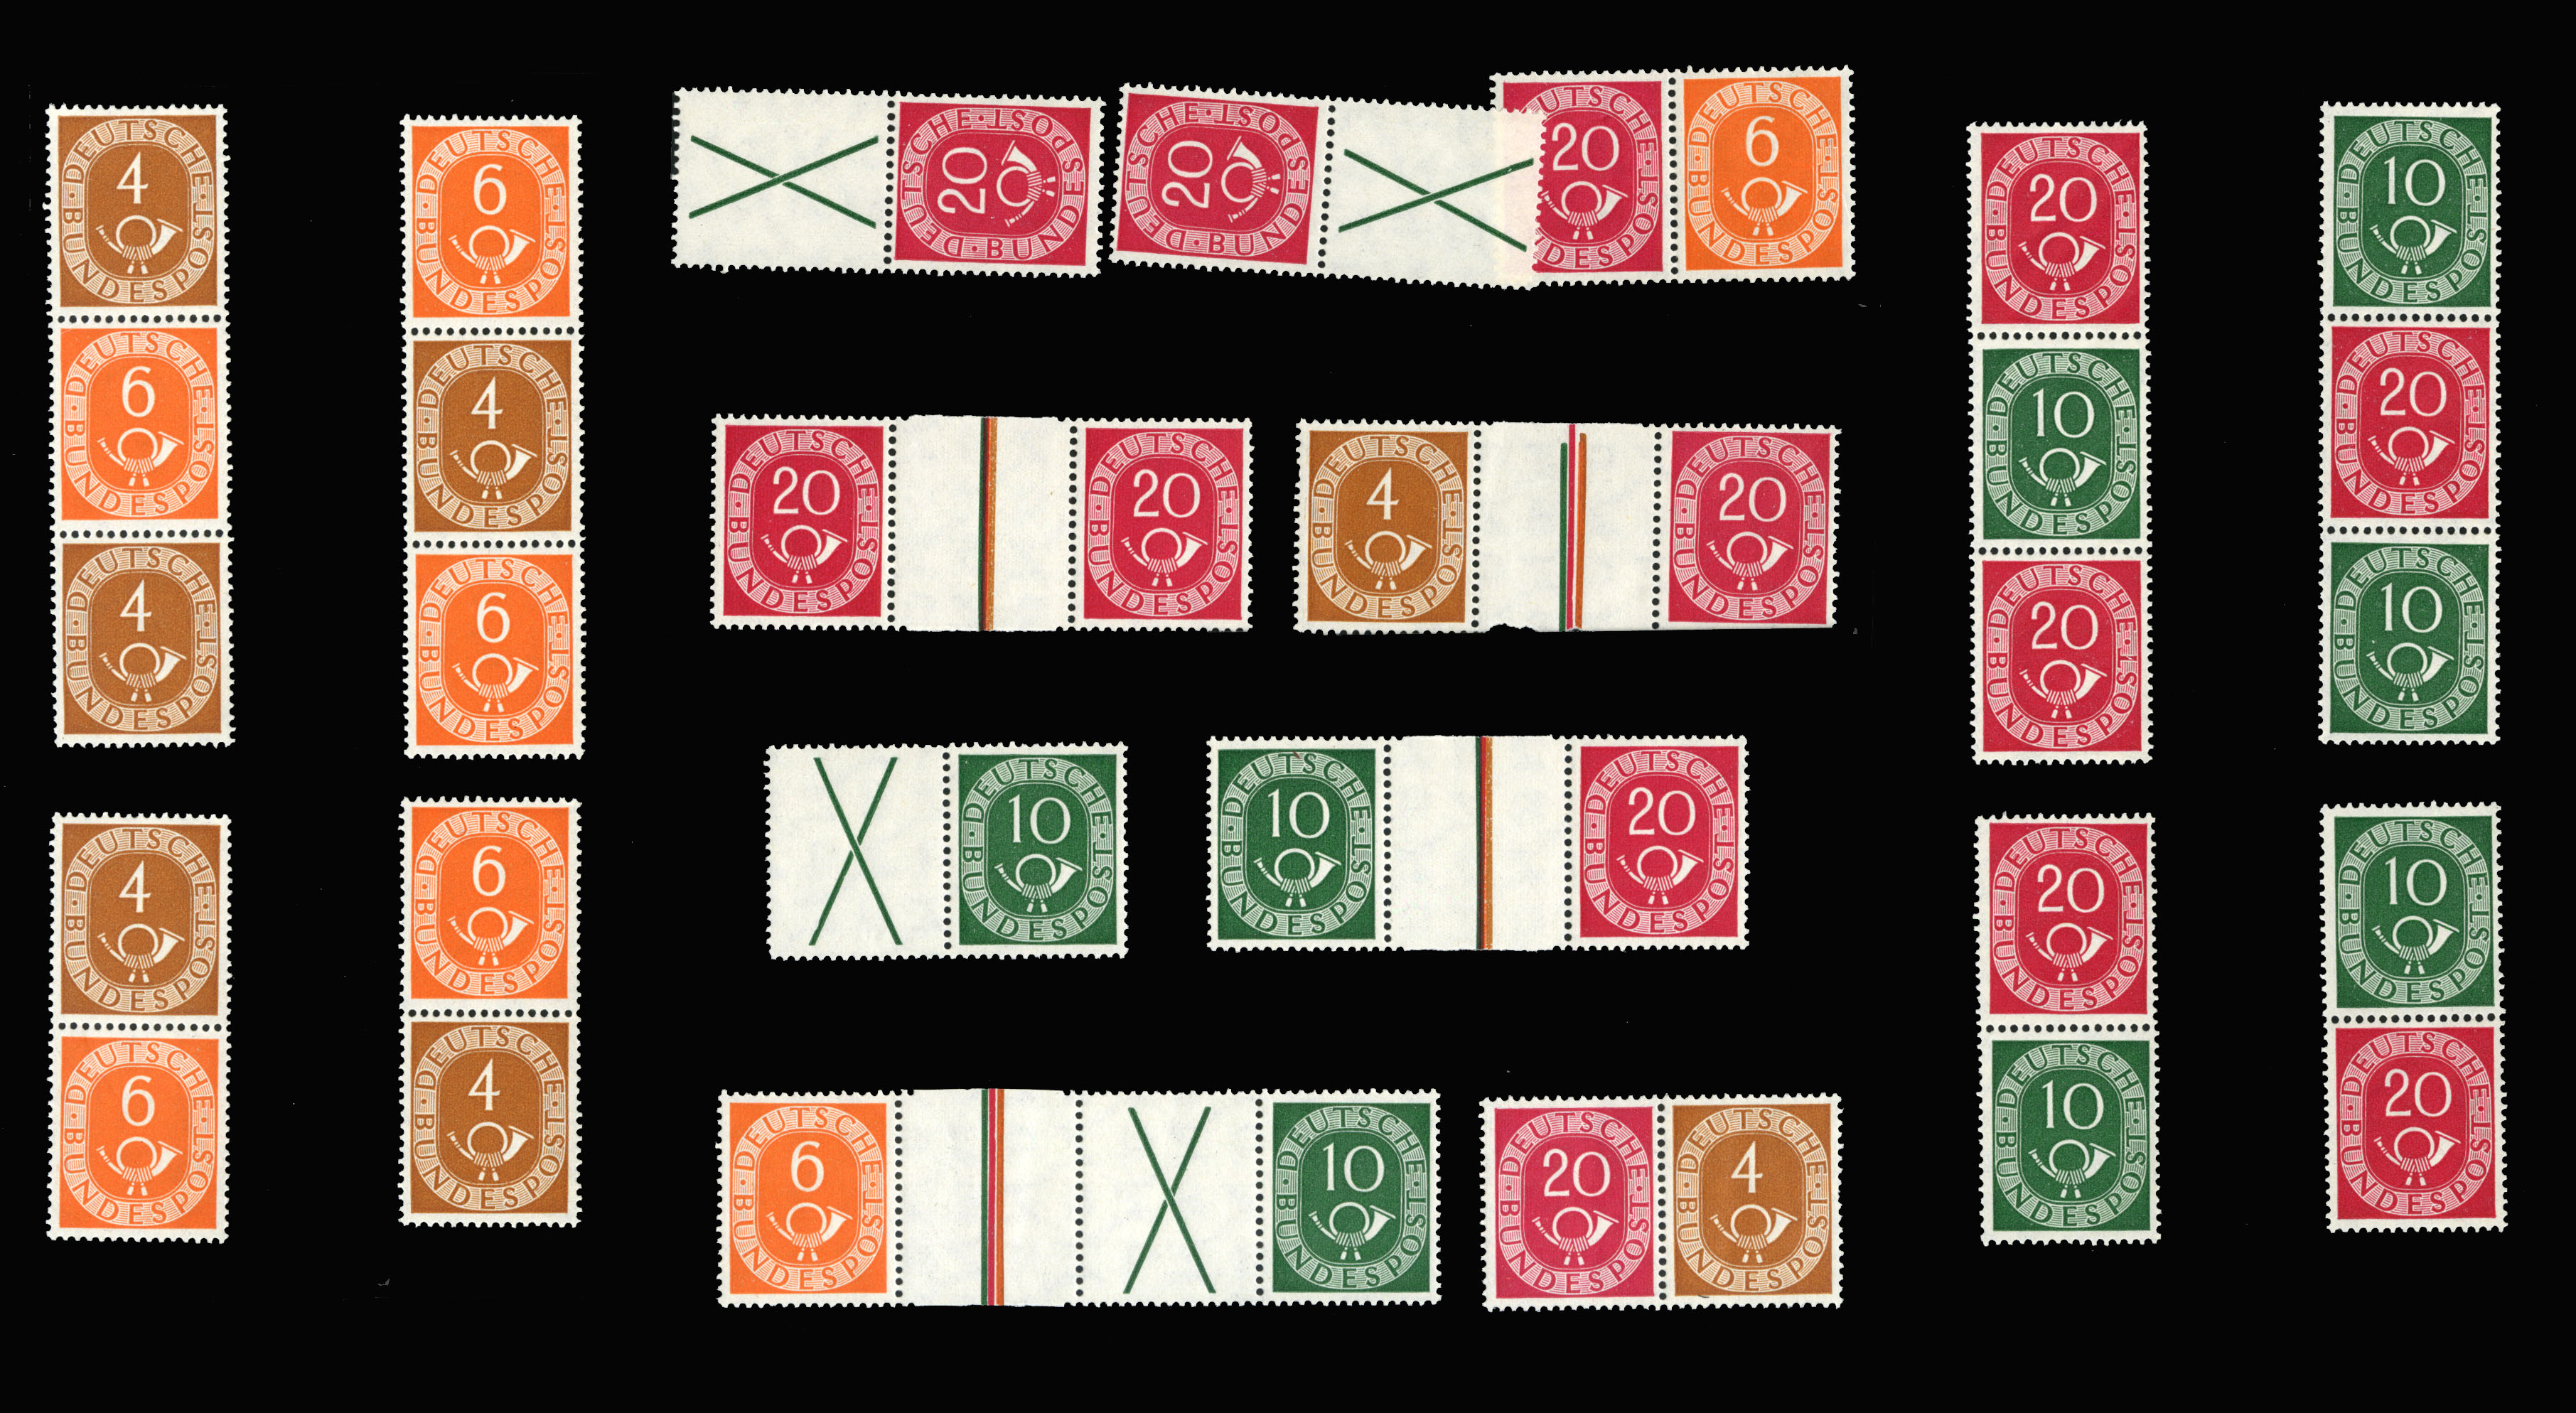 Lot 527 - BRITISH COMMONWEALTH KUWAIT  -  Cherrystone Auctions Rare Stamps & Postal History of the World